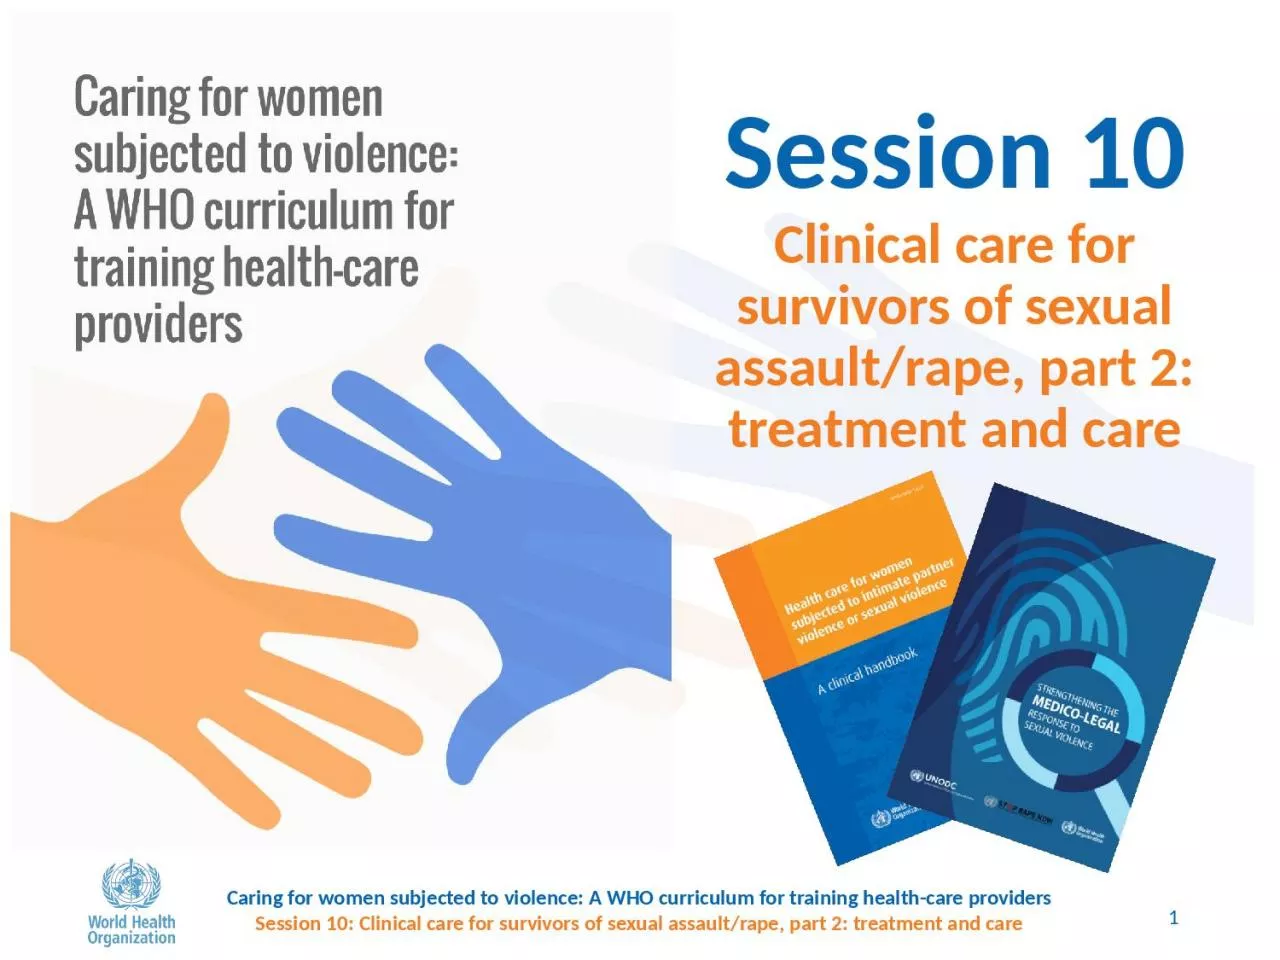 Session 10 Clinical care for survivors of sexual assault/rape, part 2: treatment and care